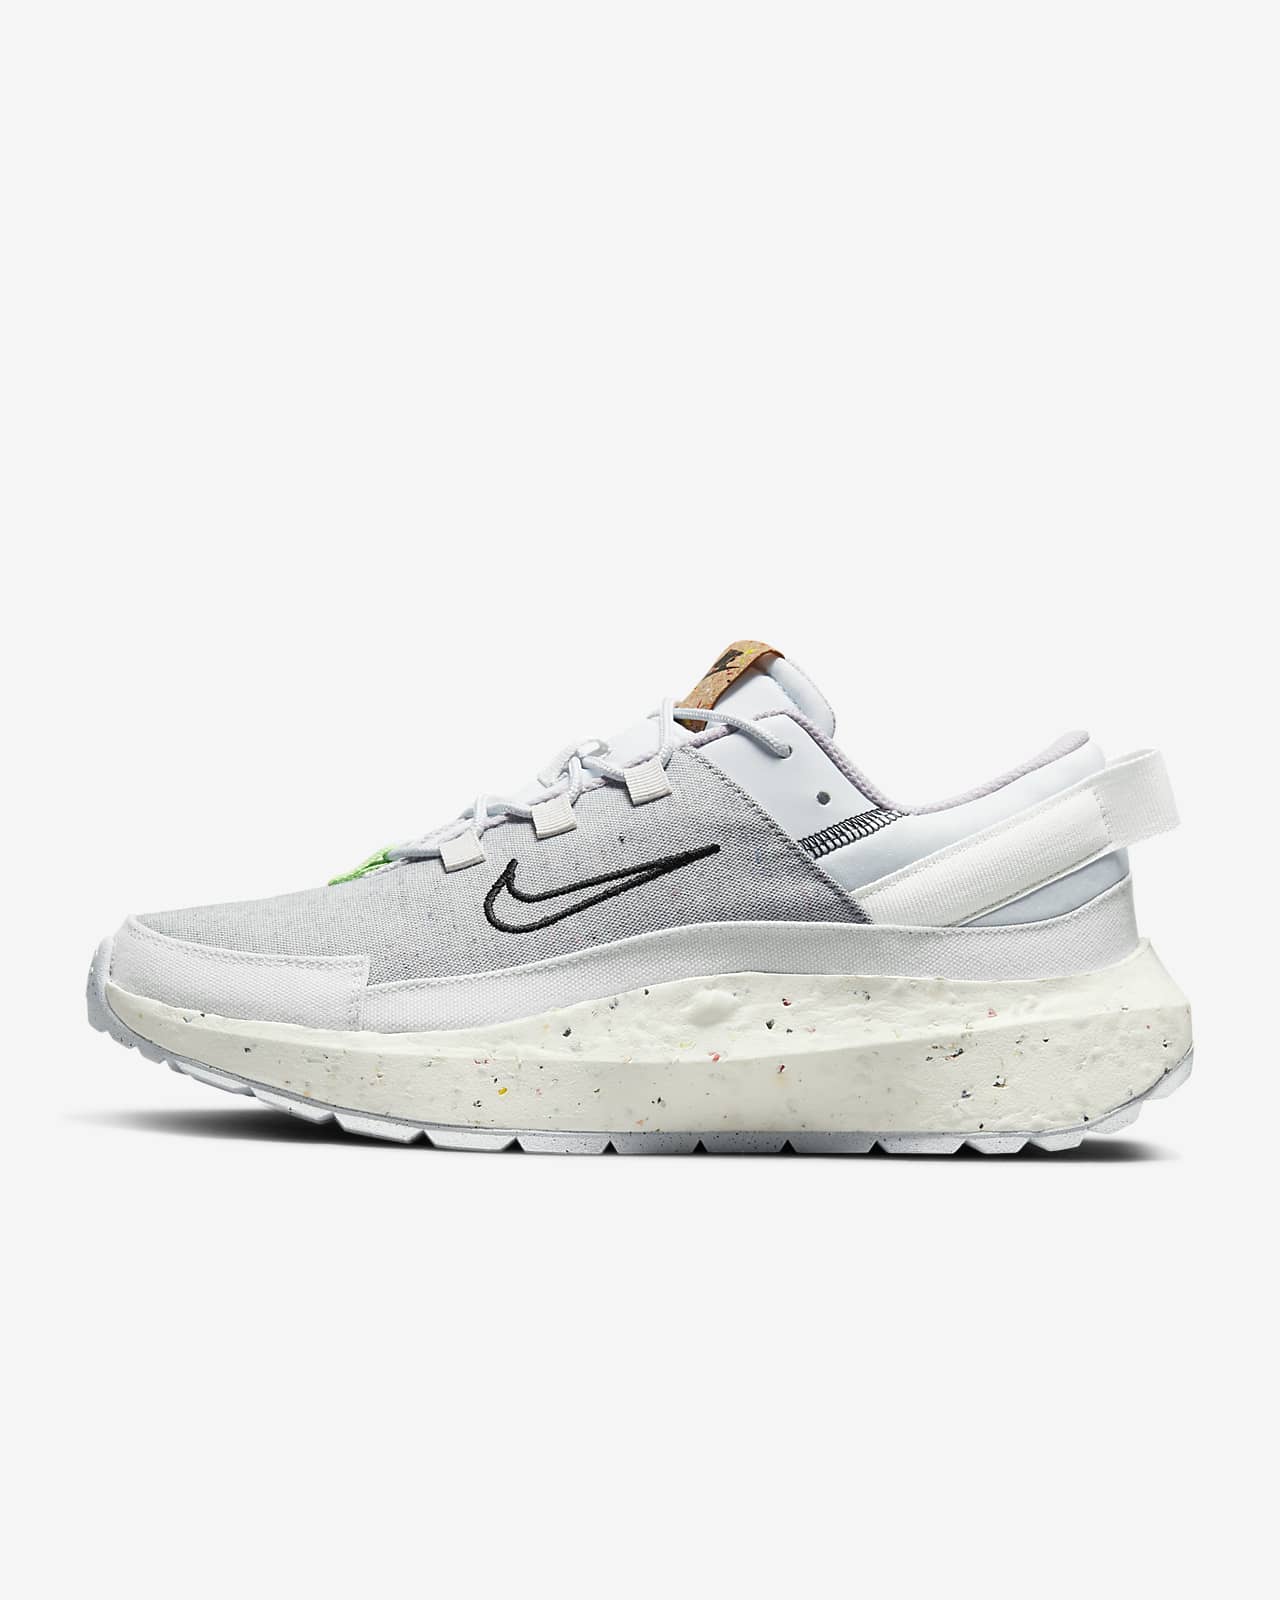 Chaussure Nike Crater Remixa pour Femme